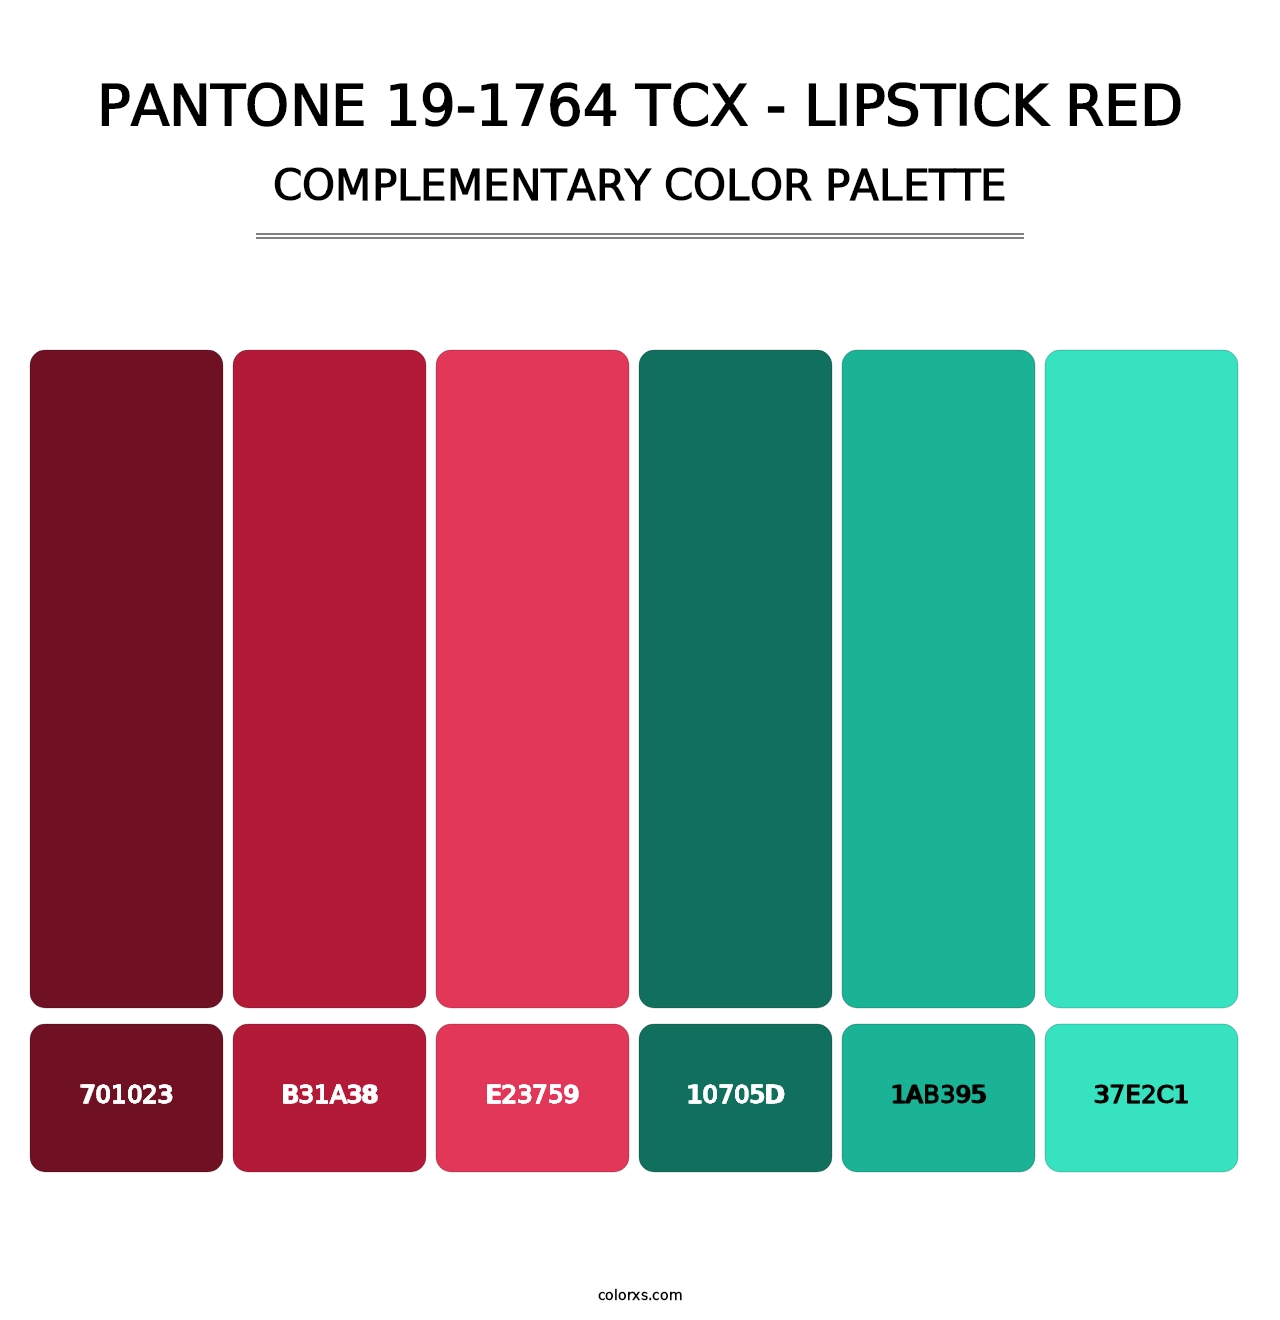 PANTONE 19-1764 TCX - Lipstick Red - Complementary Color Palette